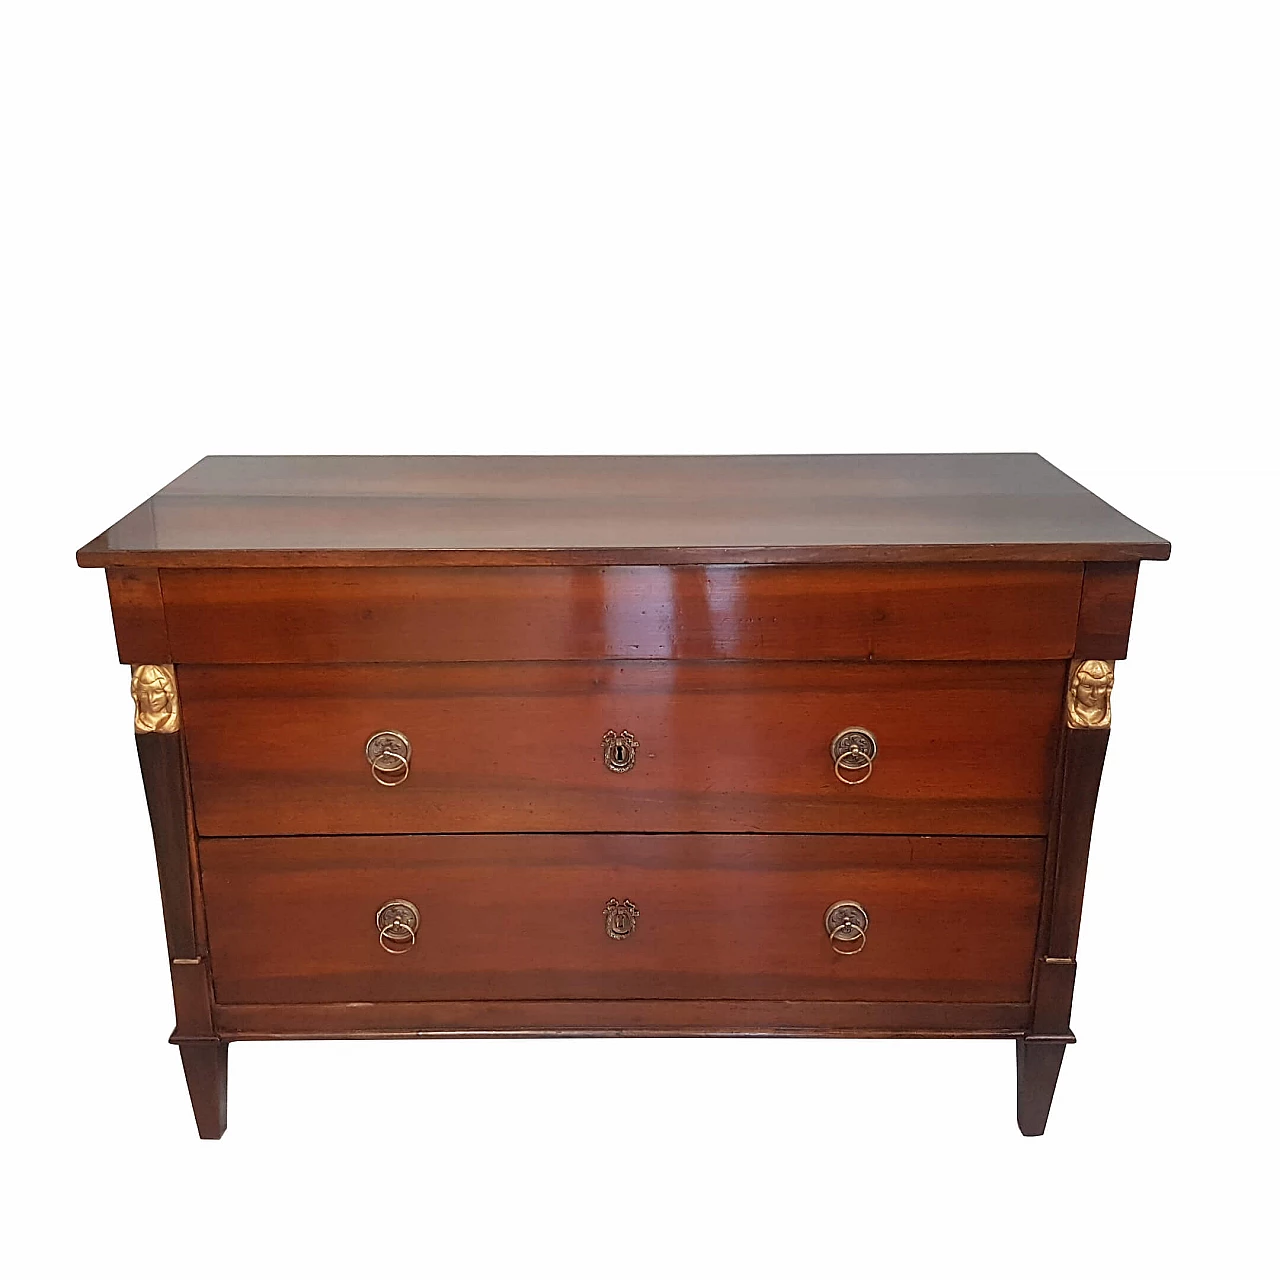 Empire walnut chest of drawers, early 19th century 1214598